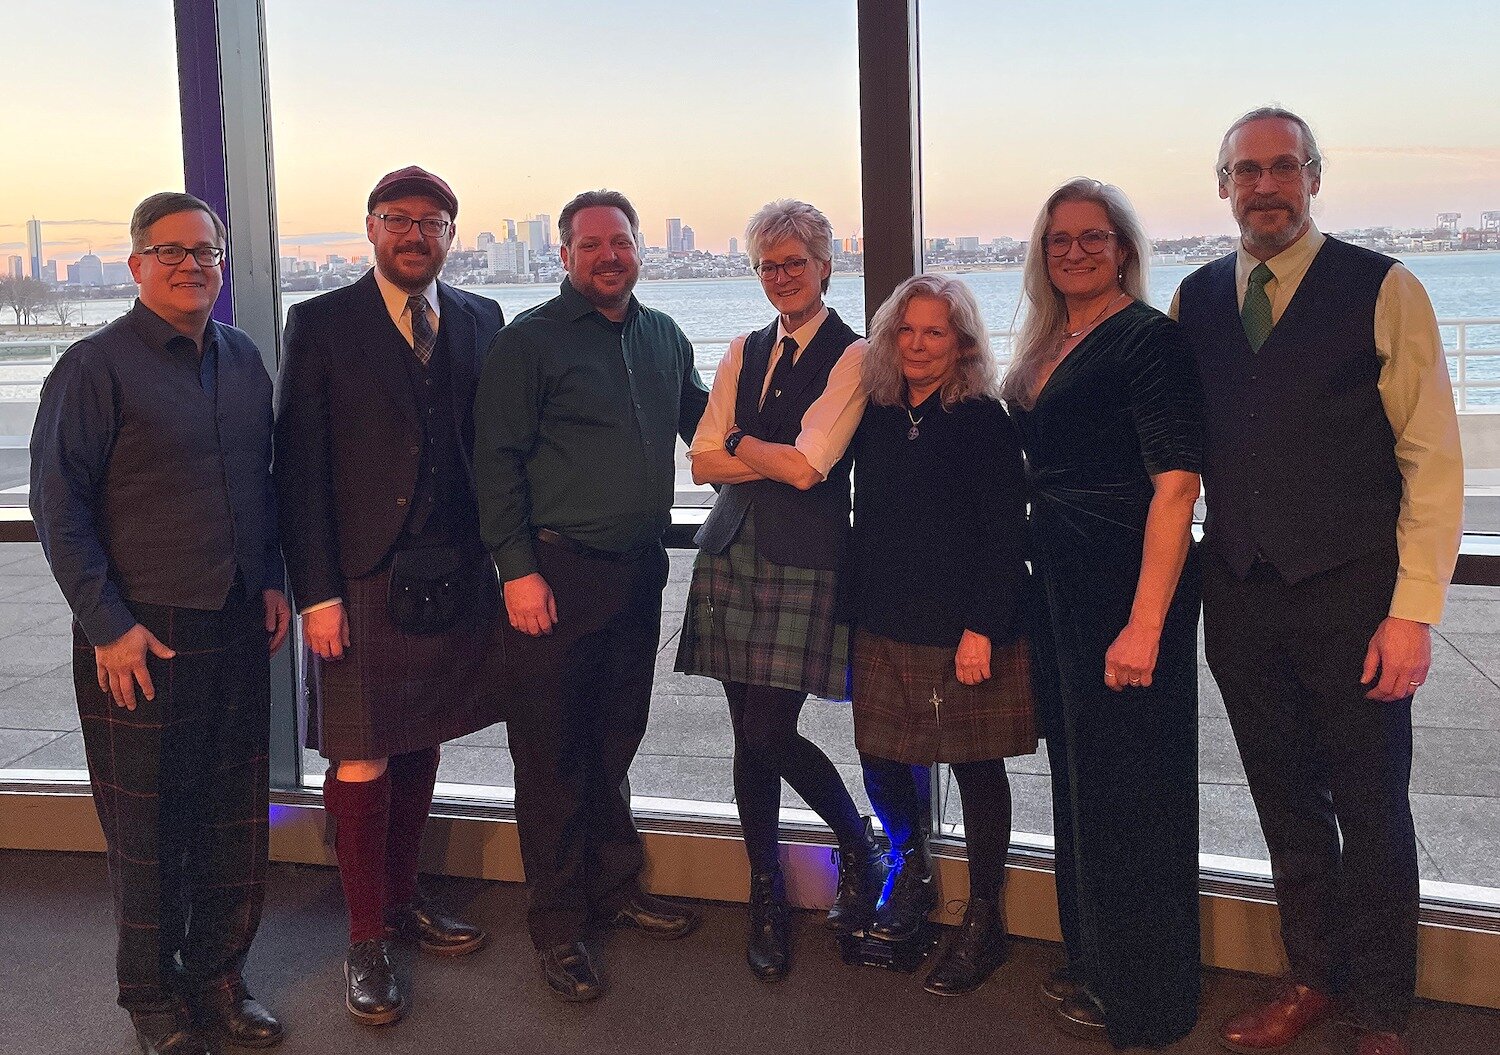 The Celtic band Fellswater, including Diane and Chris Myers, performed recently at the JFK Library, with Boston Harbor and the Boston skyline in the background.